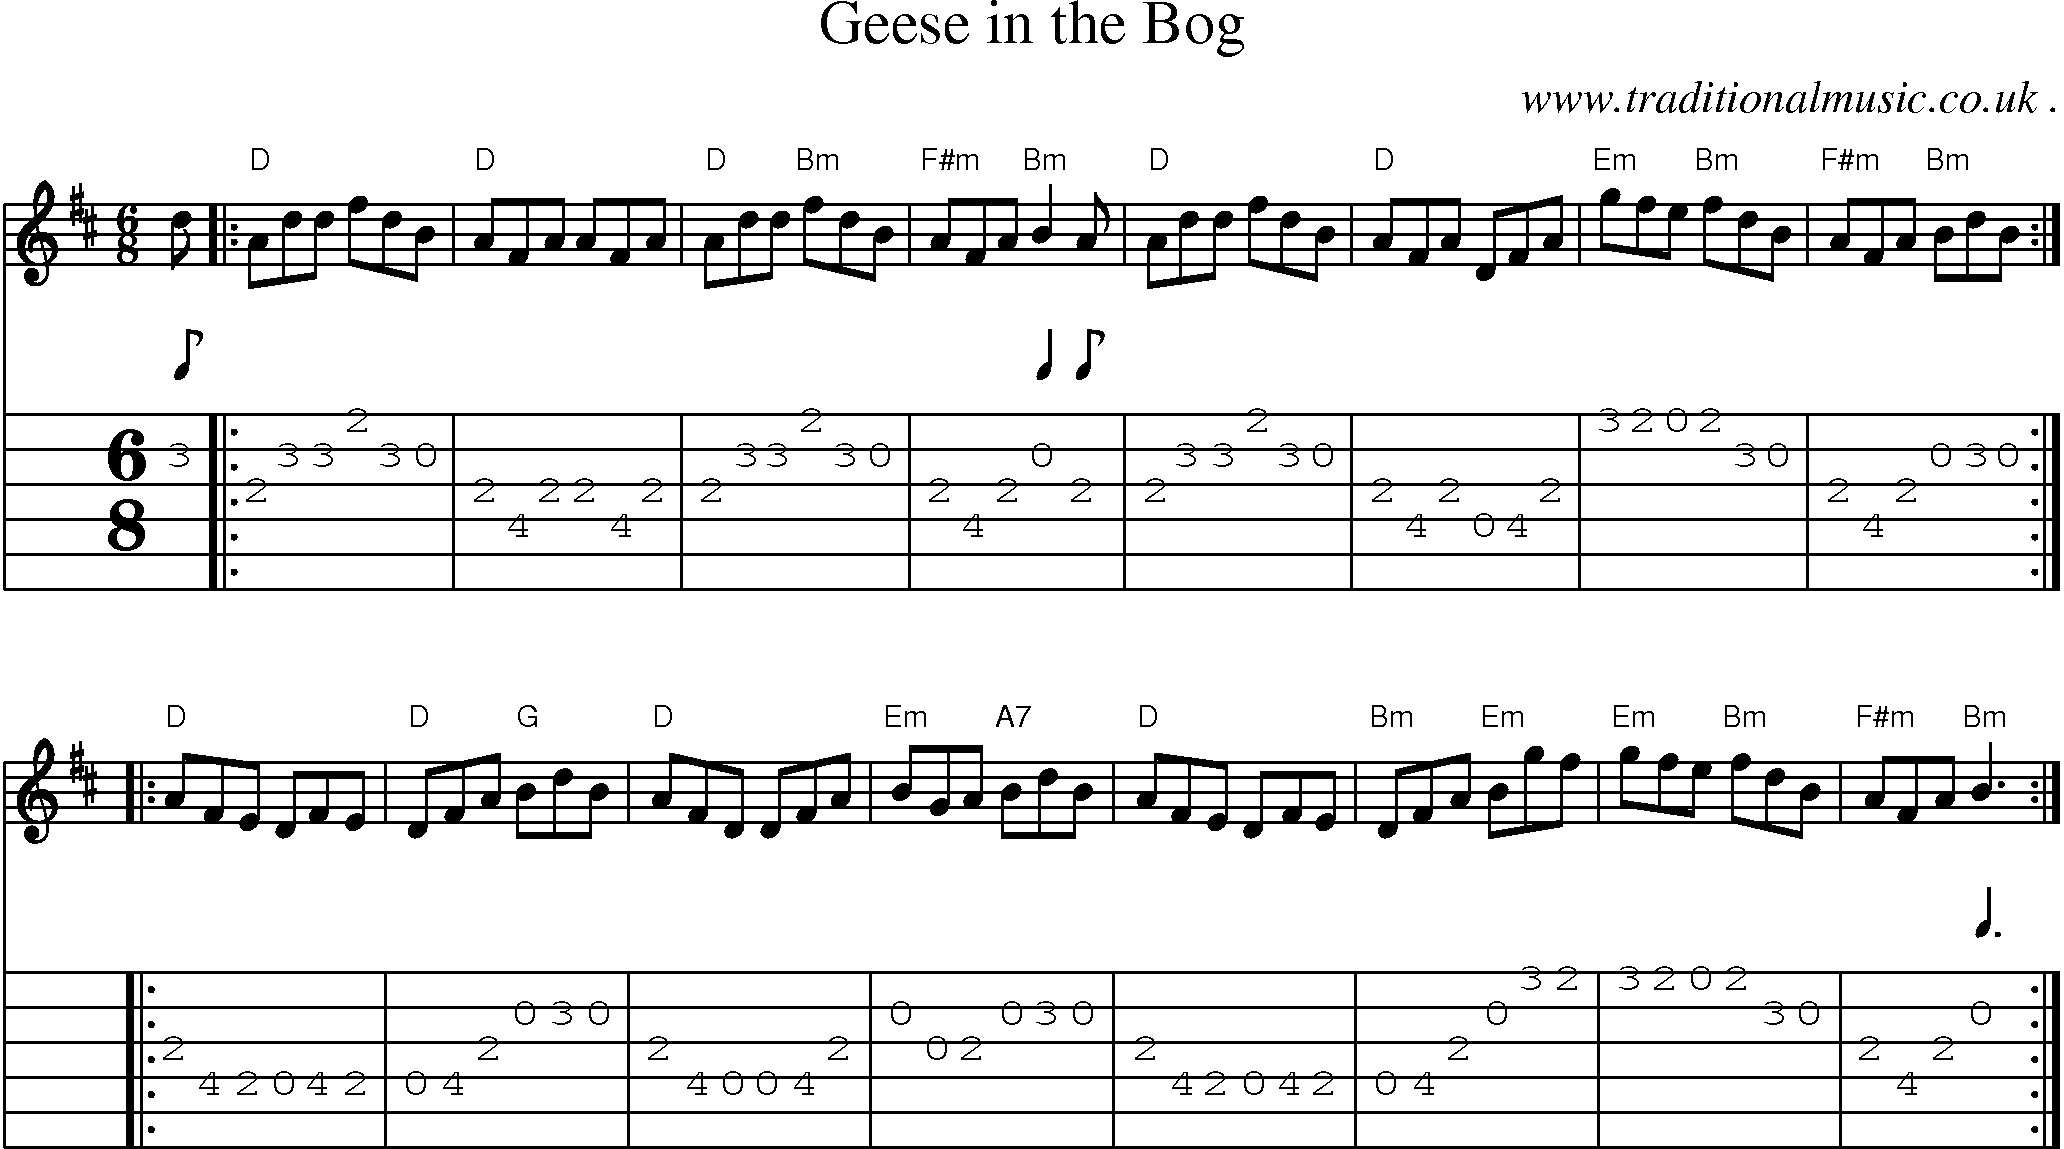 Sheet-music  score, Chords and Guitar Tabs for Geese In The Bog